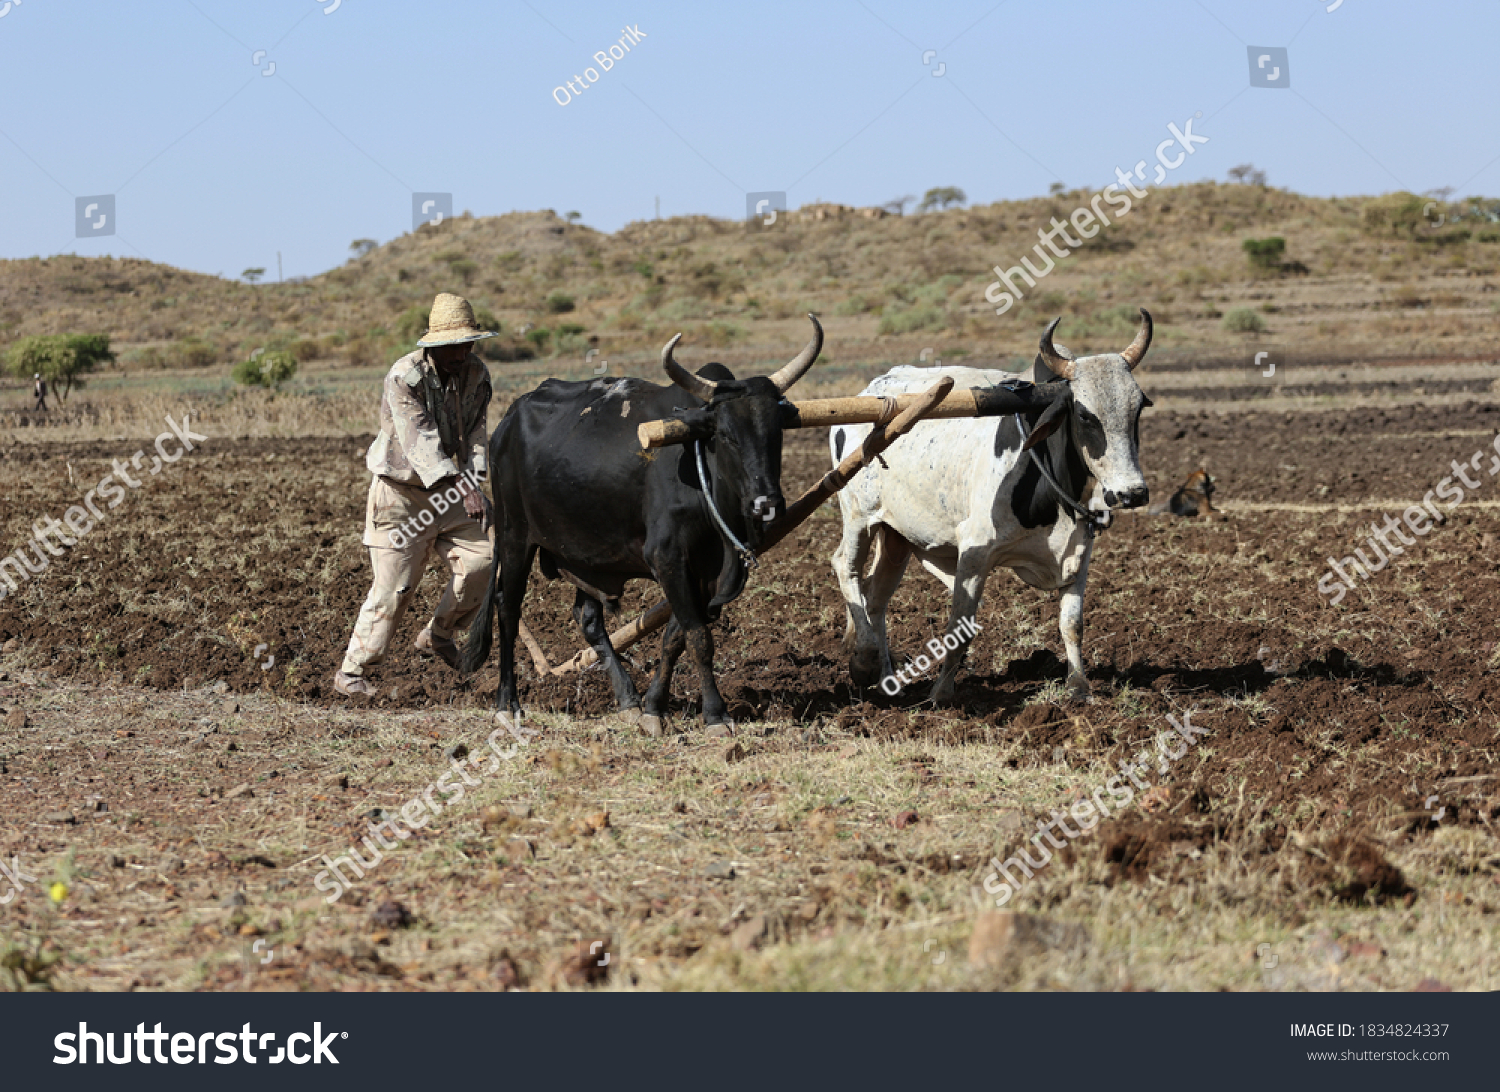 a man pulling two oxen in a field